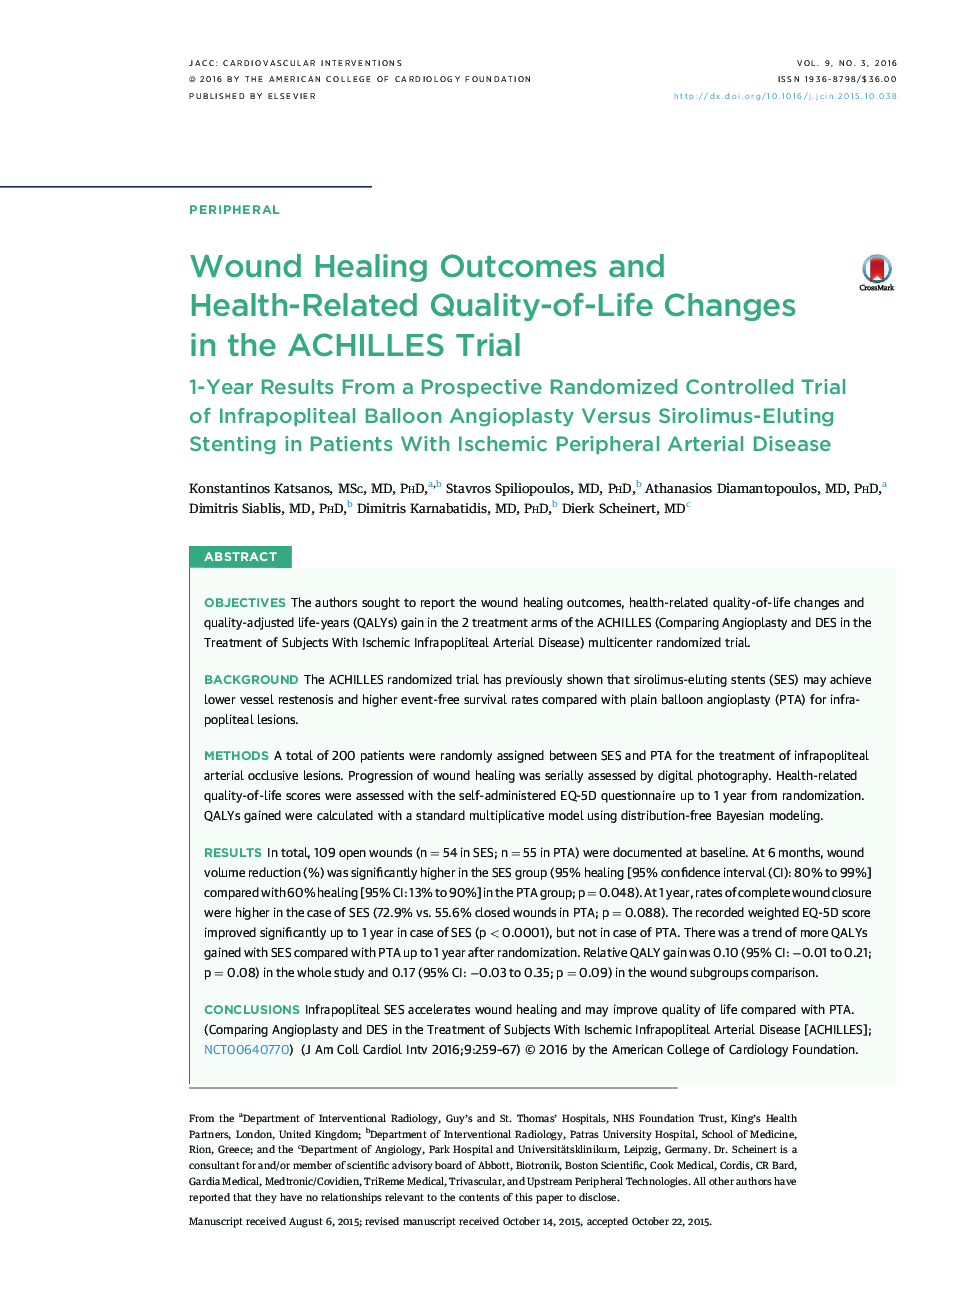 Wound Healing Outcomes and Health-Related Quality-of-Life Changes in the ACHILLES Trial: 1-Year Results From a Prospective Randomized Controlled Trial of Infrapopliteal Balloon Angioplasty Versus Sirolimus-Eluting Stenting in Patients With Ischemic Periph